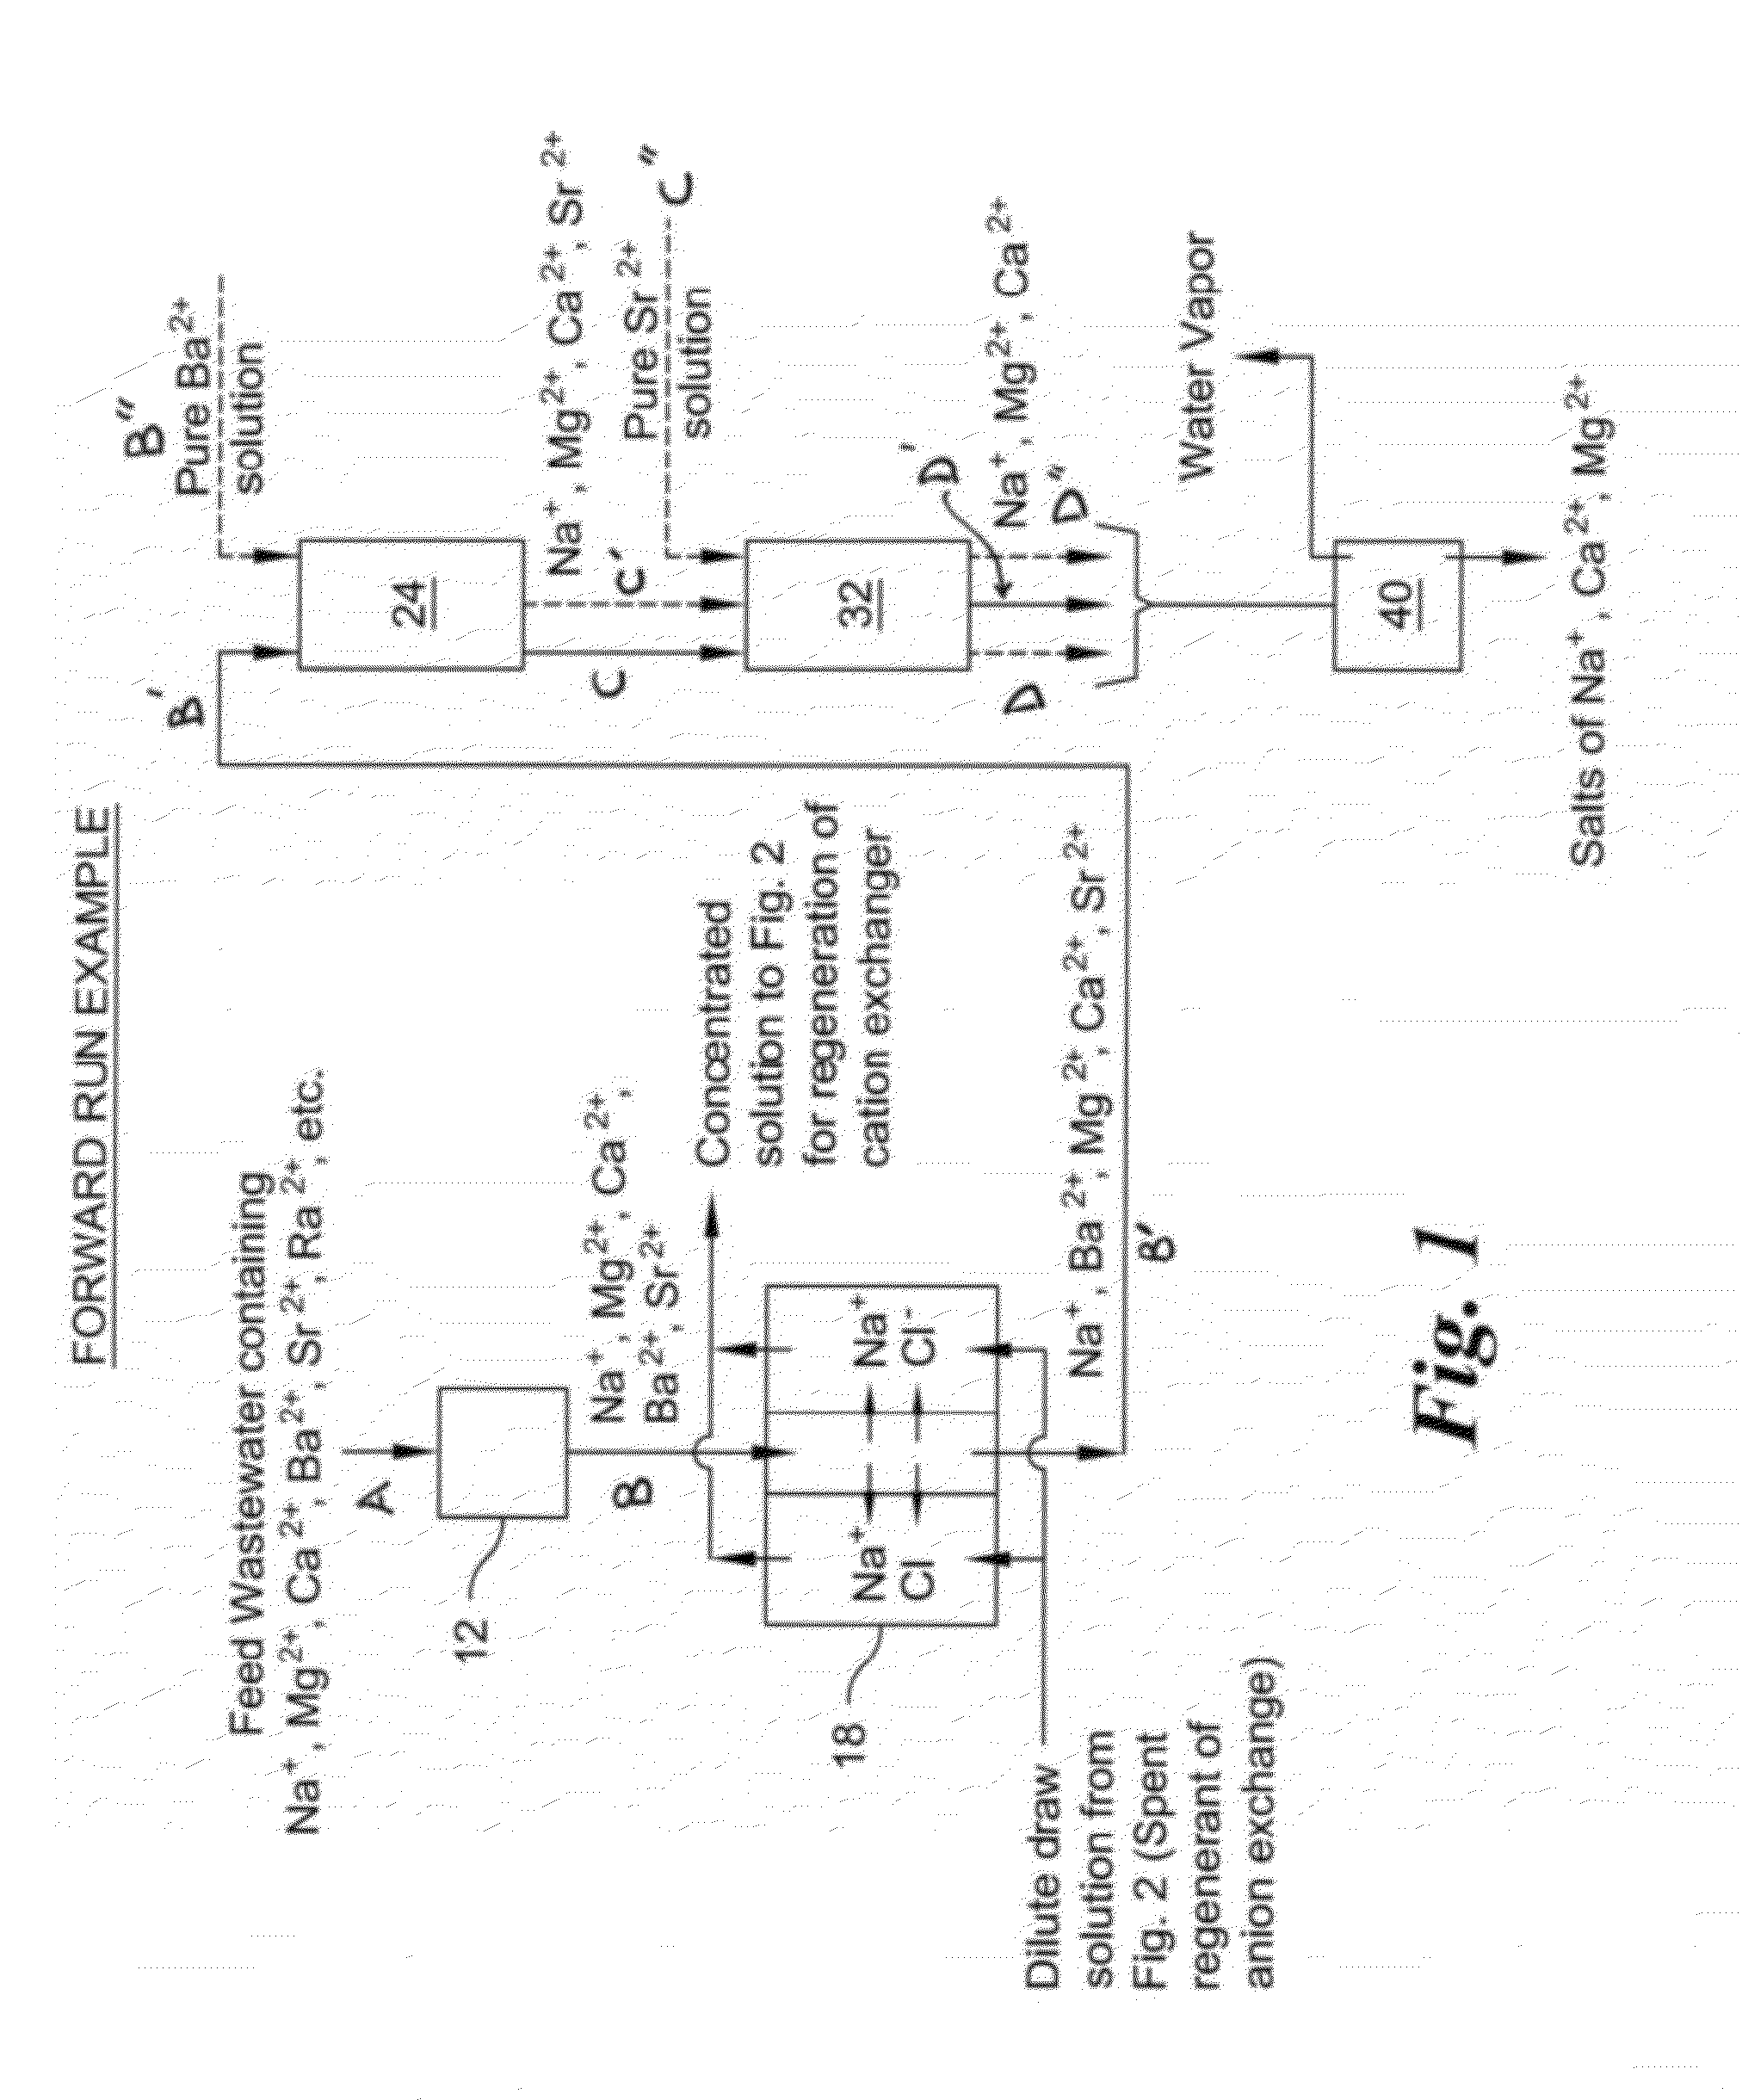 Method of treatment of produced water and recovery of important divalent cations